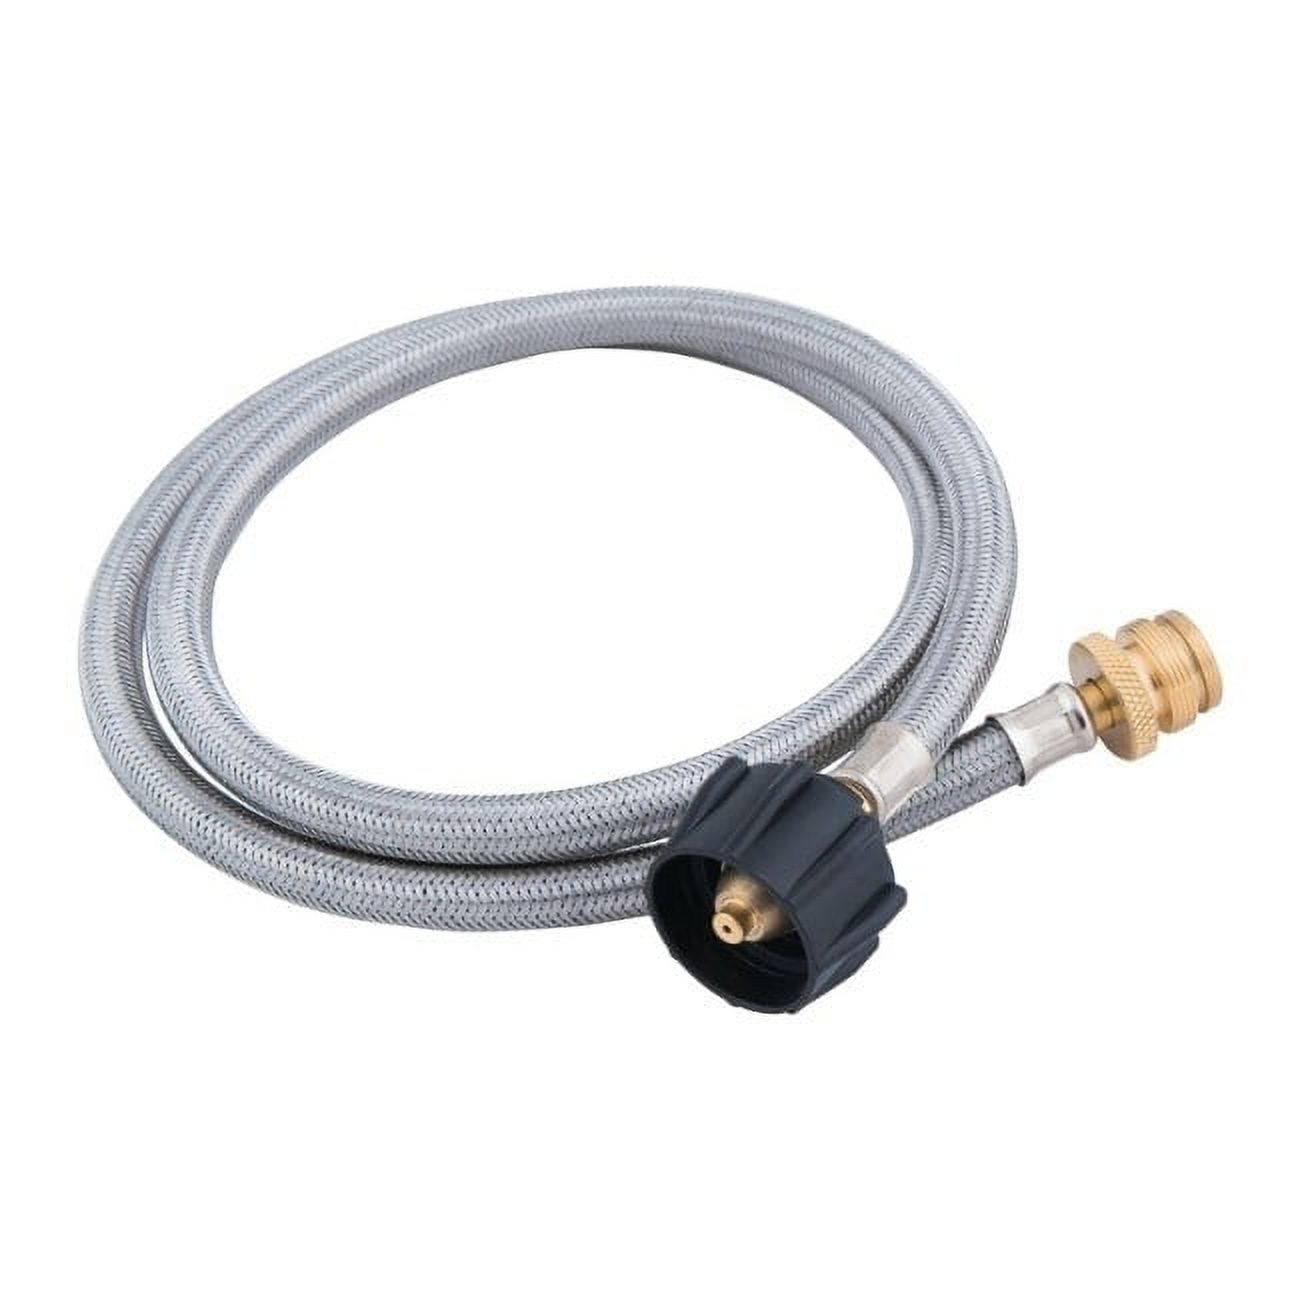 Grillmark 68004 Gas Line Hose and Adapter, 46" - image 2 of 2